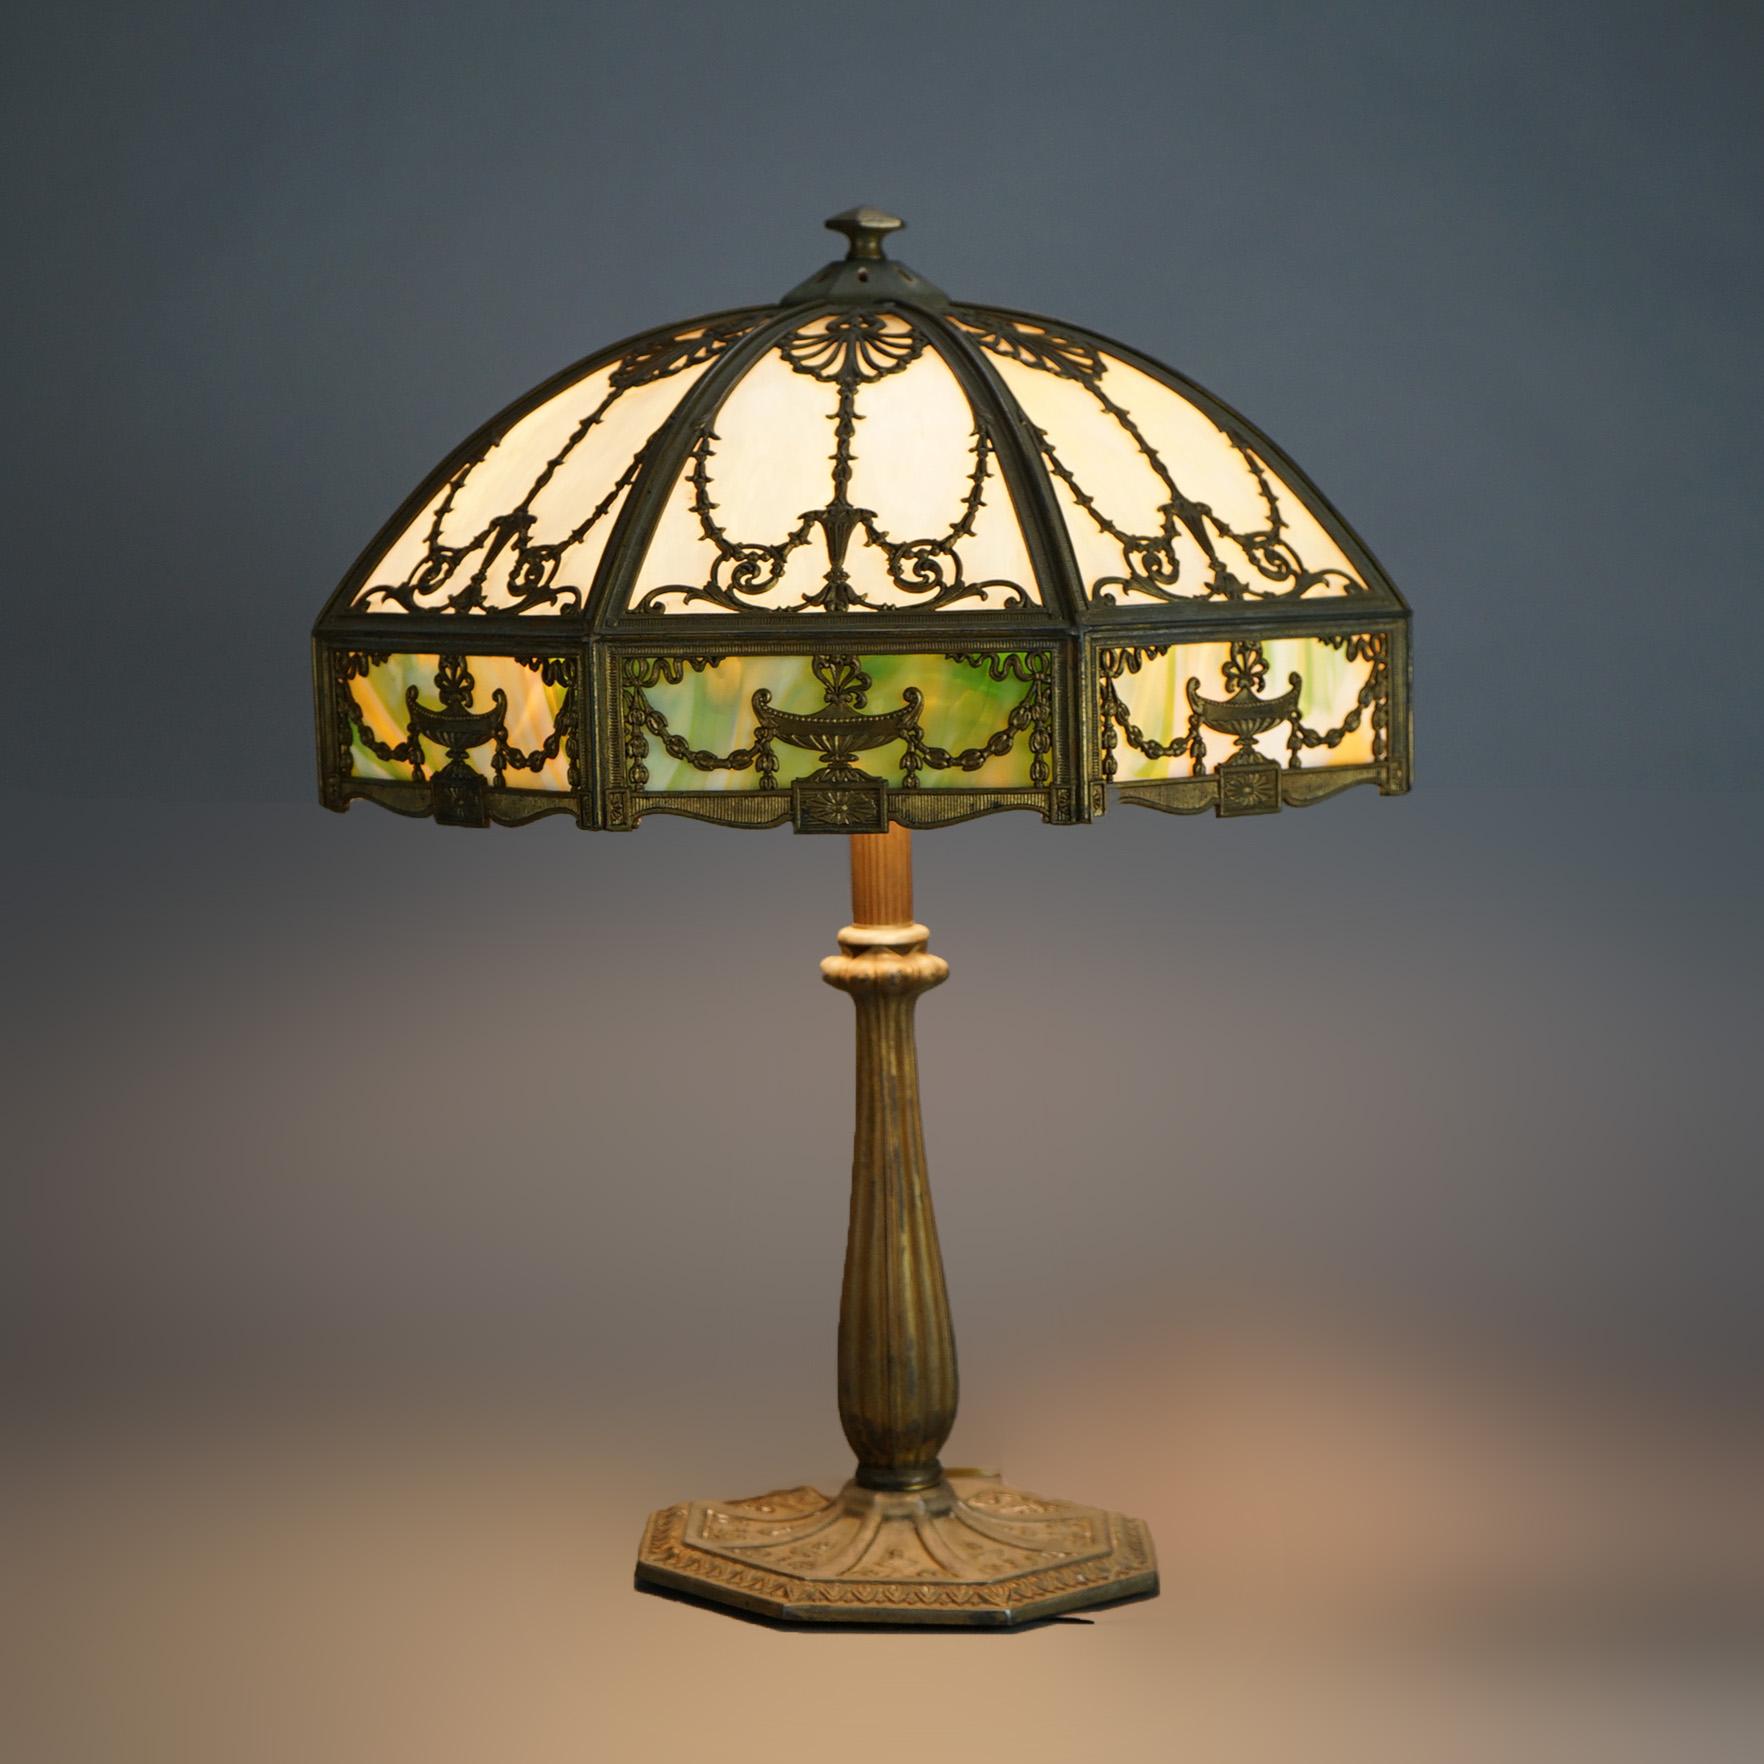 An antique Arts & Crafts table lamp by Bradley & Hubbard offers dome form shade with cast frame having Neoclassical urn and foliate design, housing two tone slag glass over a triple socket base, c1920

Measures- 23''H x 16''W x 16''D